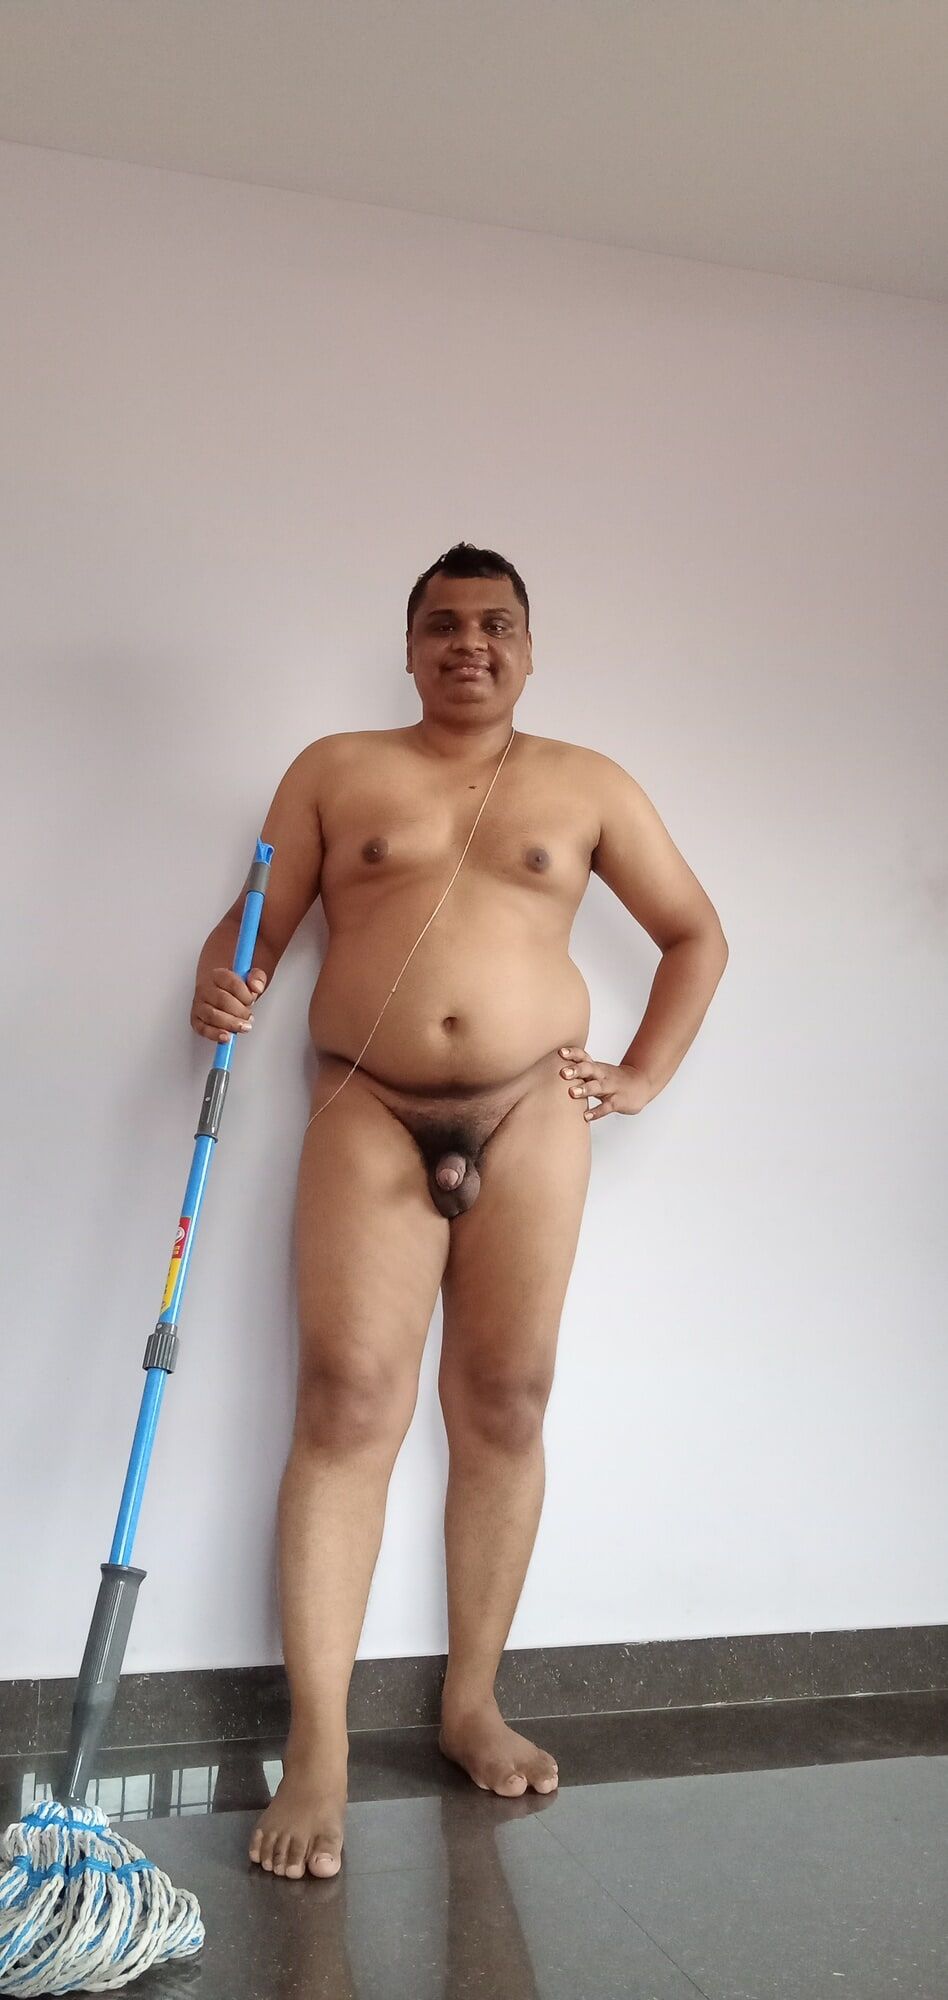 Sweeper boy naked completely #9